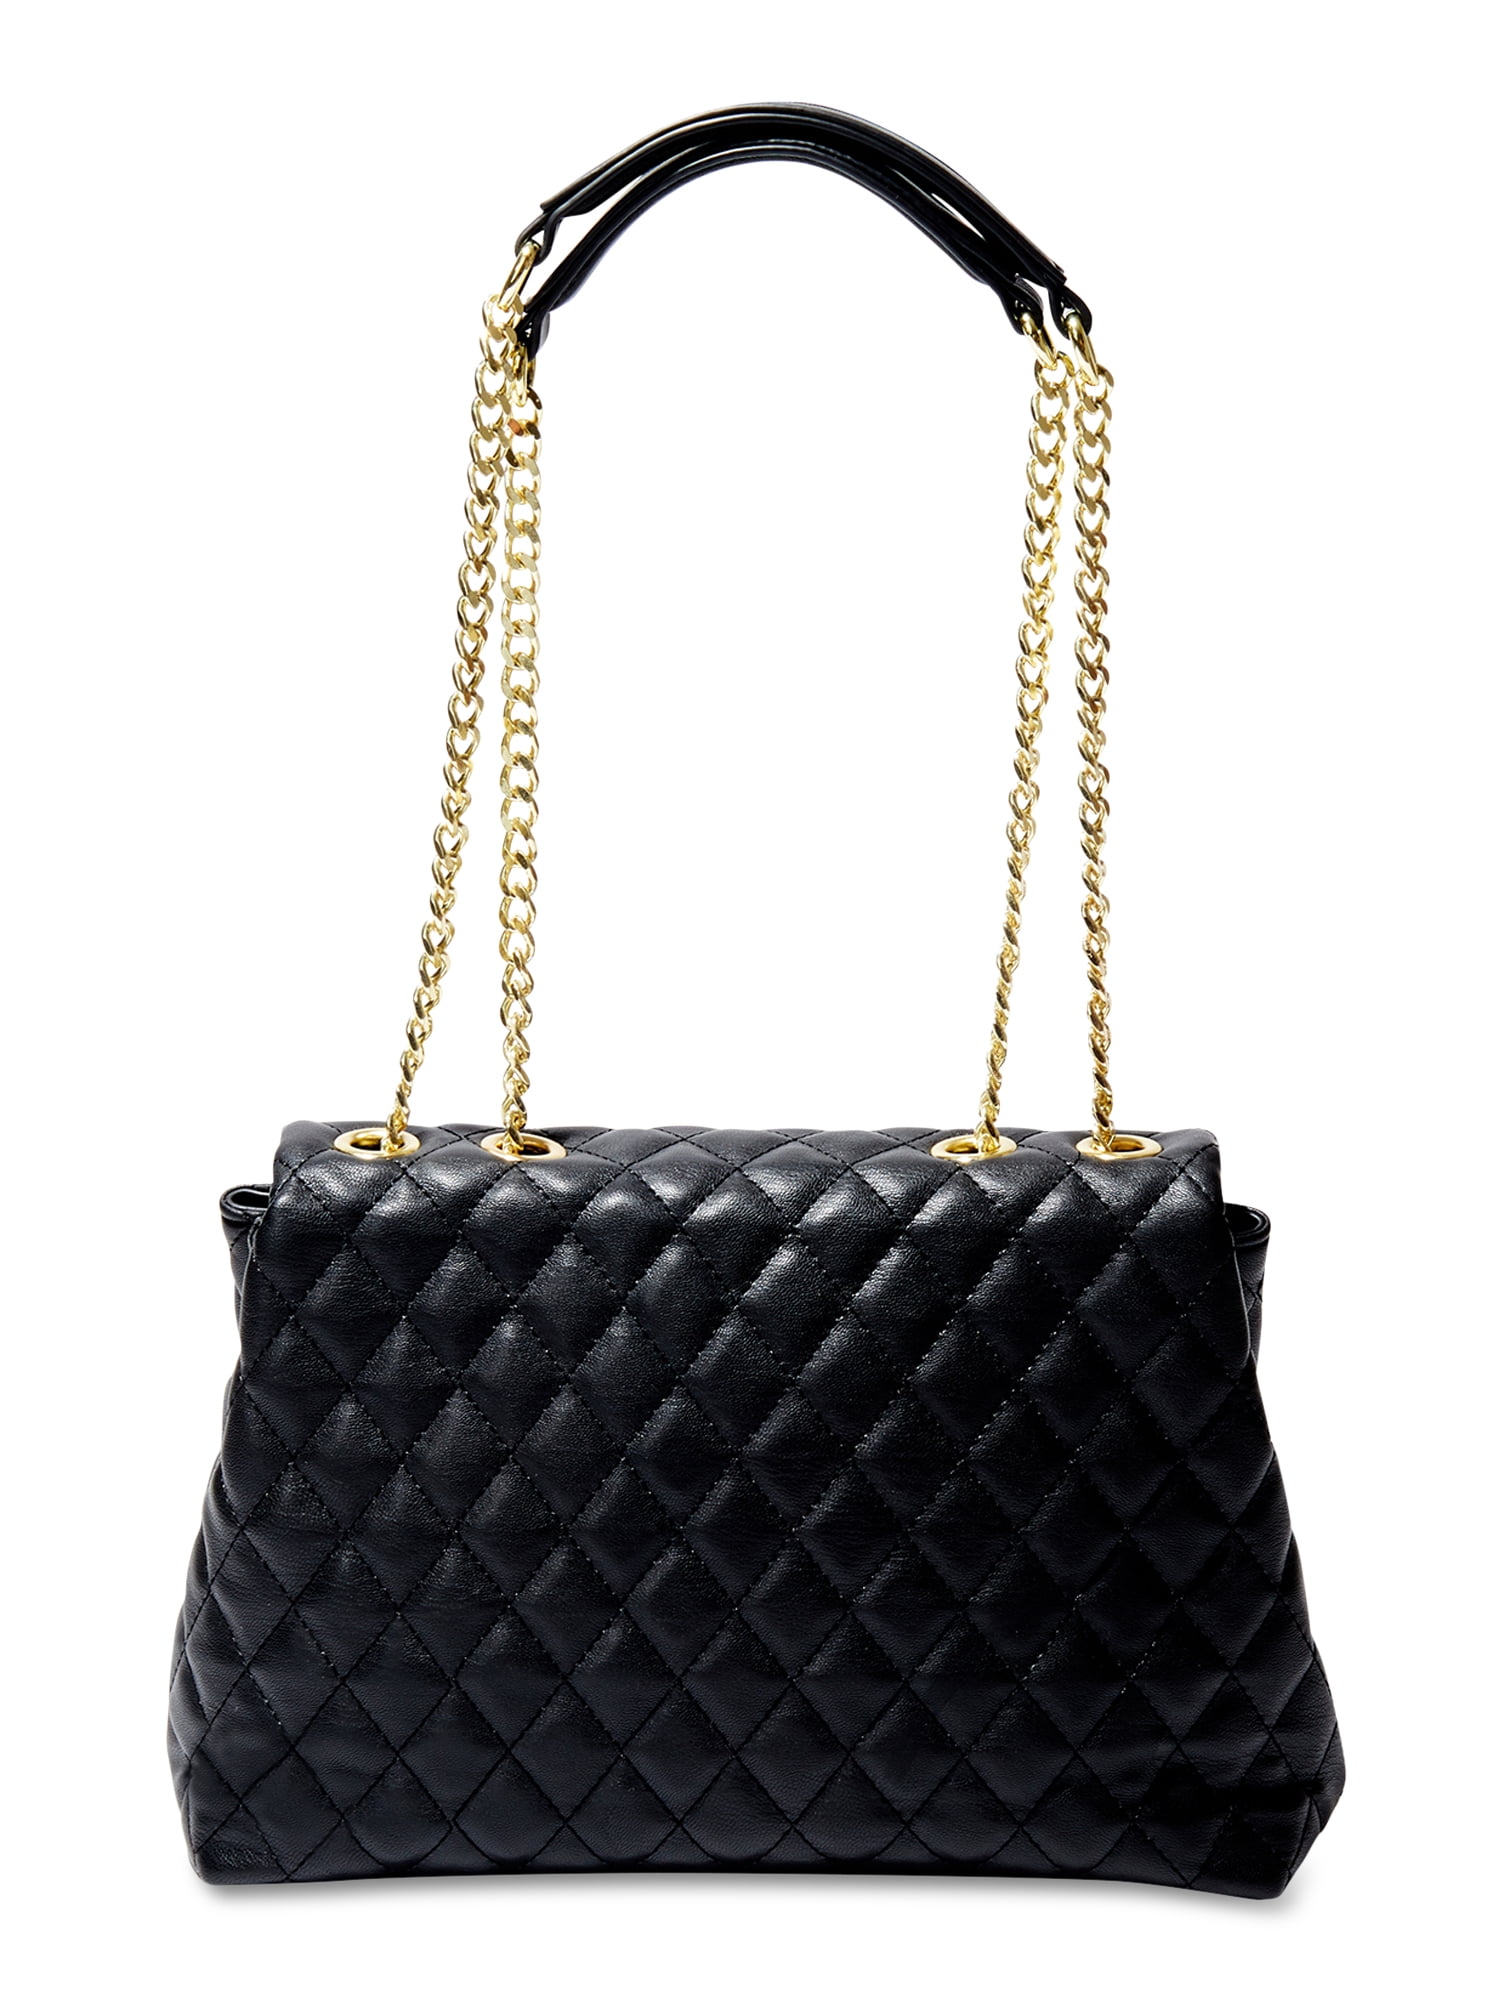 Chanel Trapezoid - 8 For Sale on 1stDibs  vintage chanel trapezoid bag,  chanel trapezoid bag